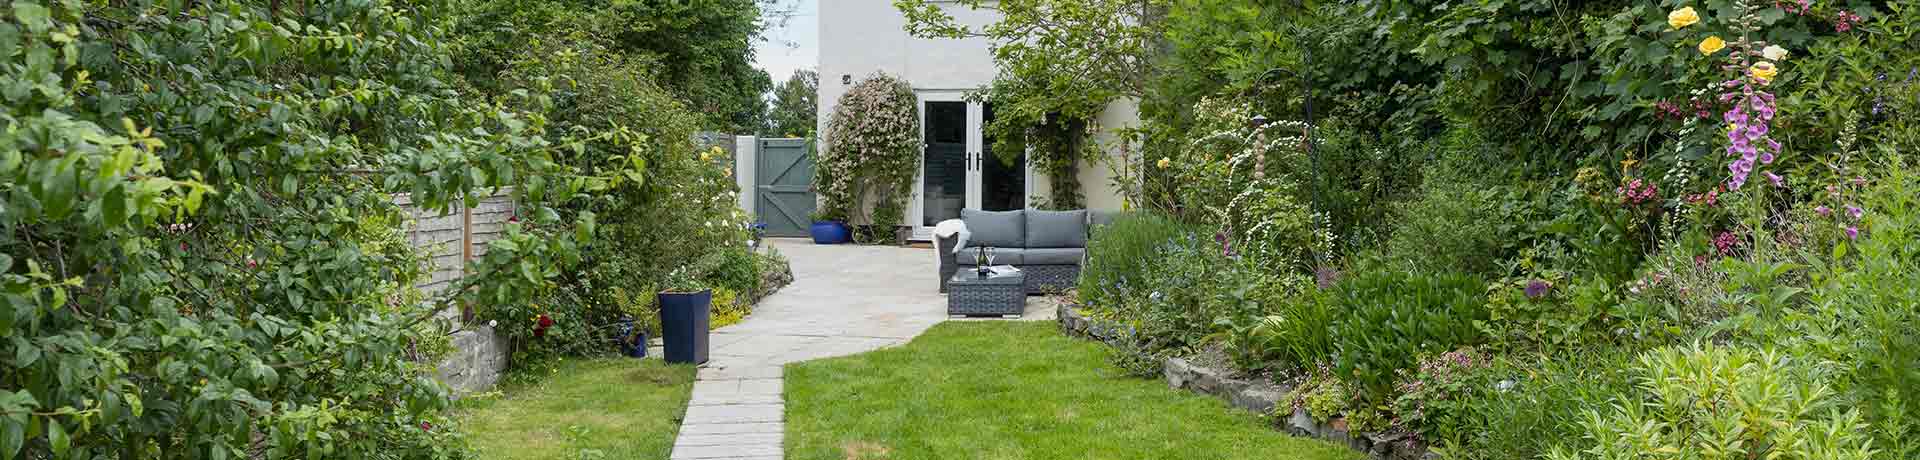 Dog friendly cottages in The Cotswolds with an enclosed garden.